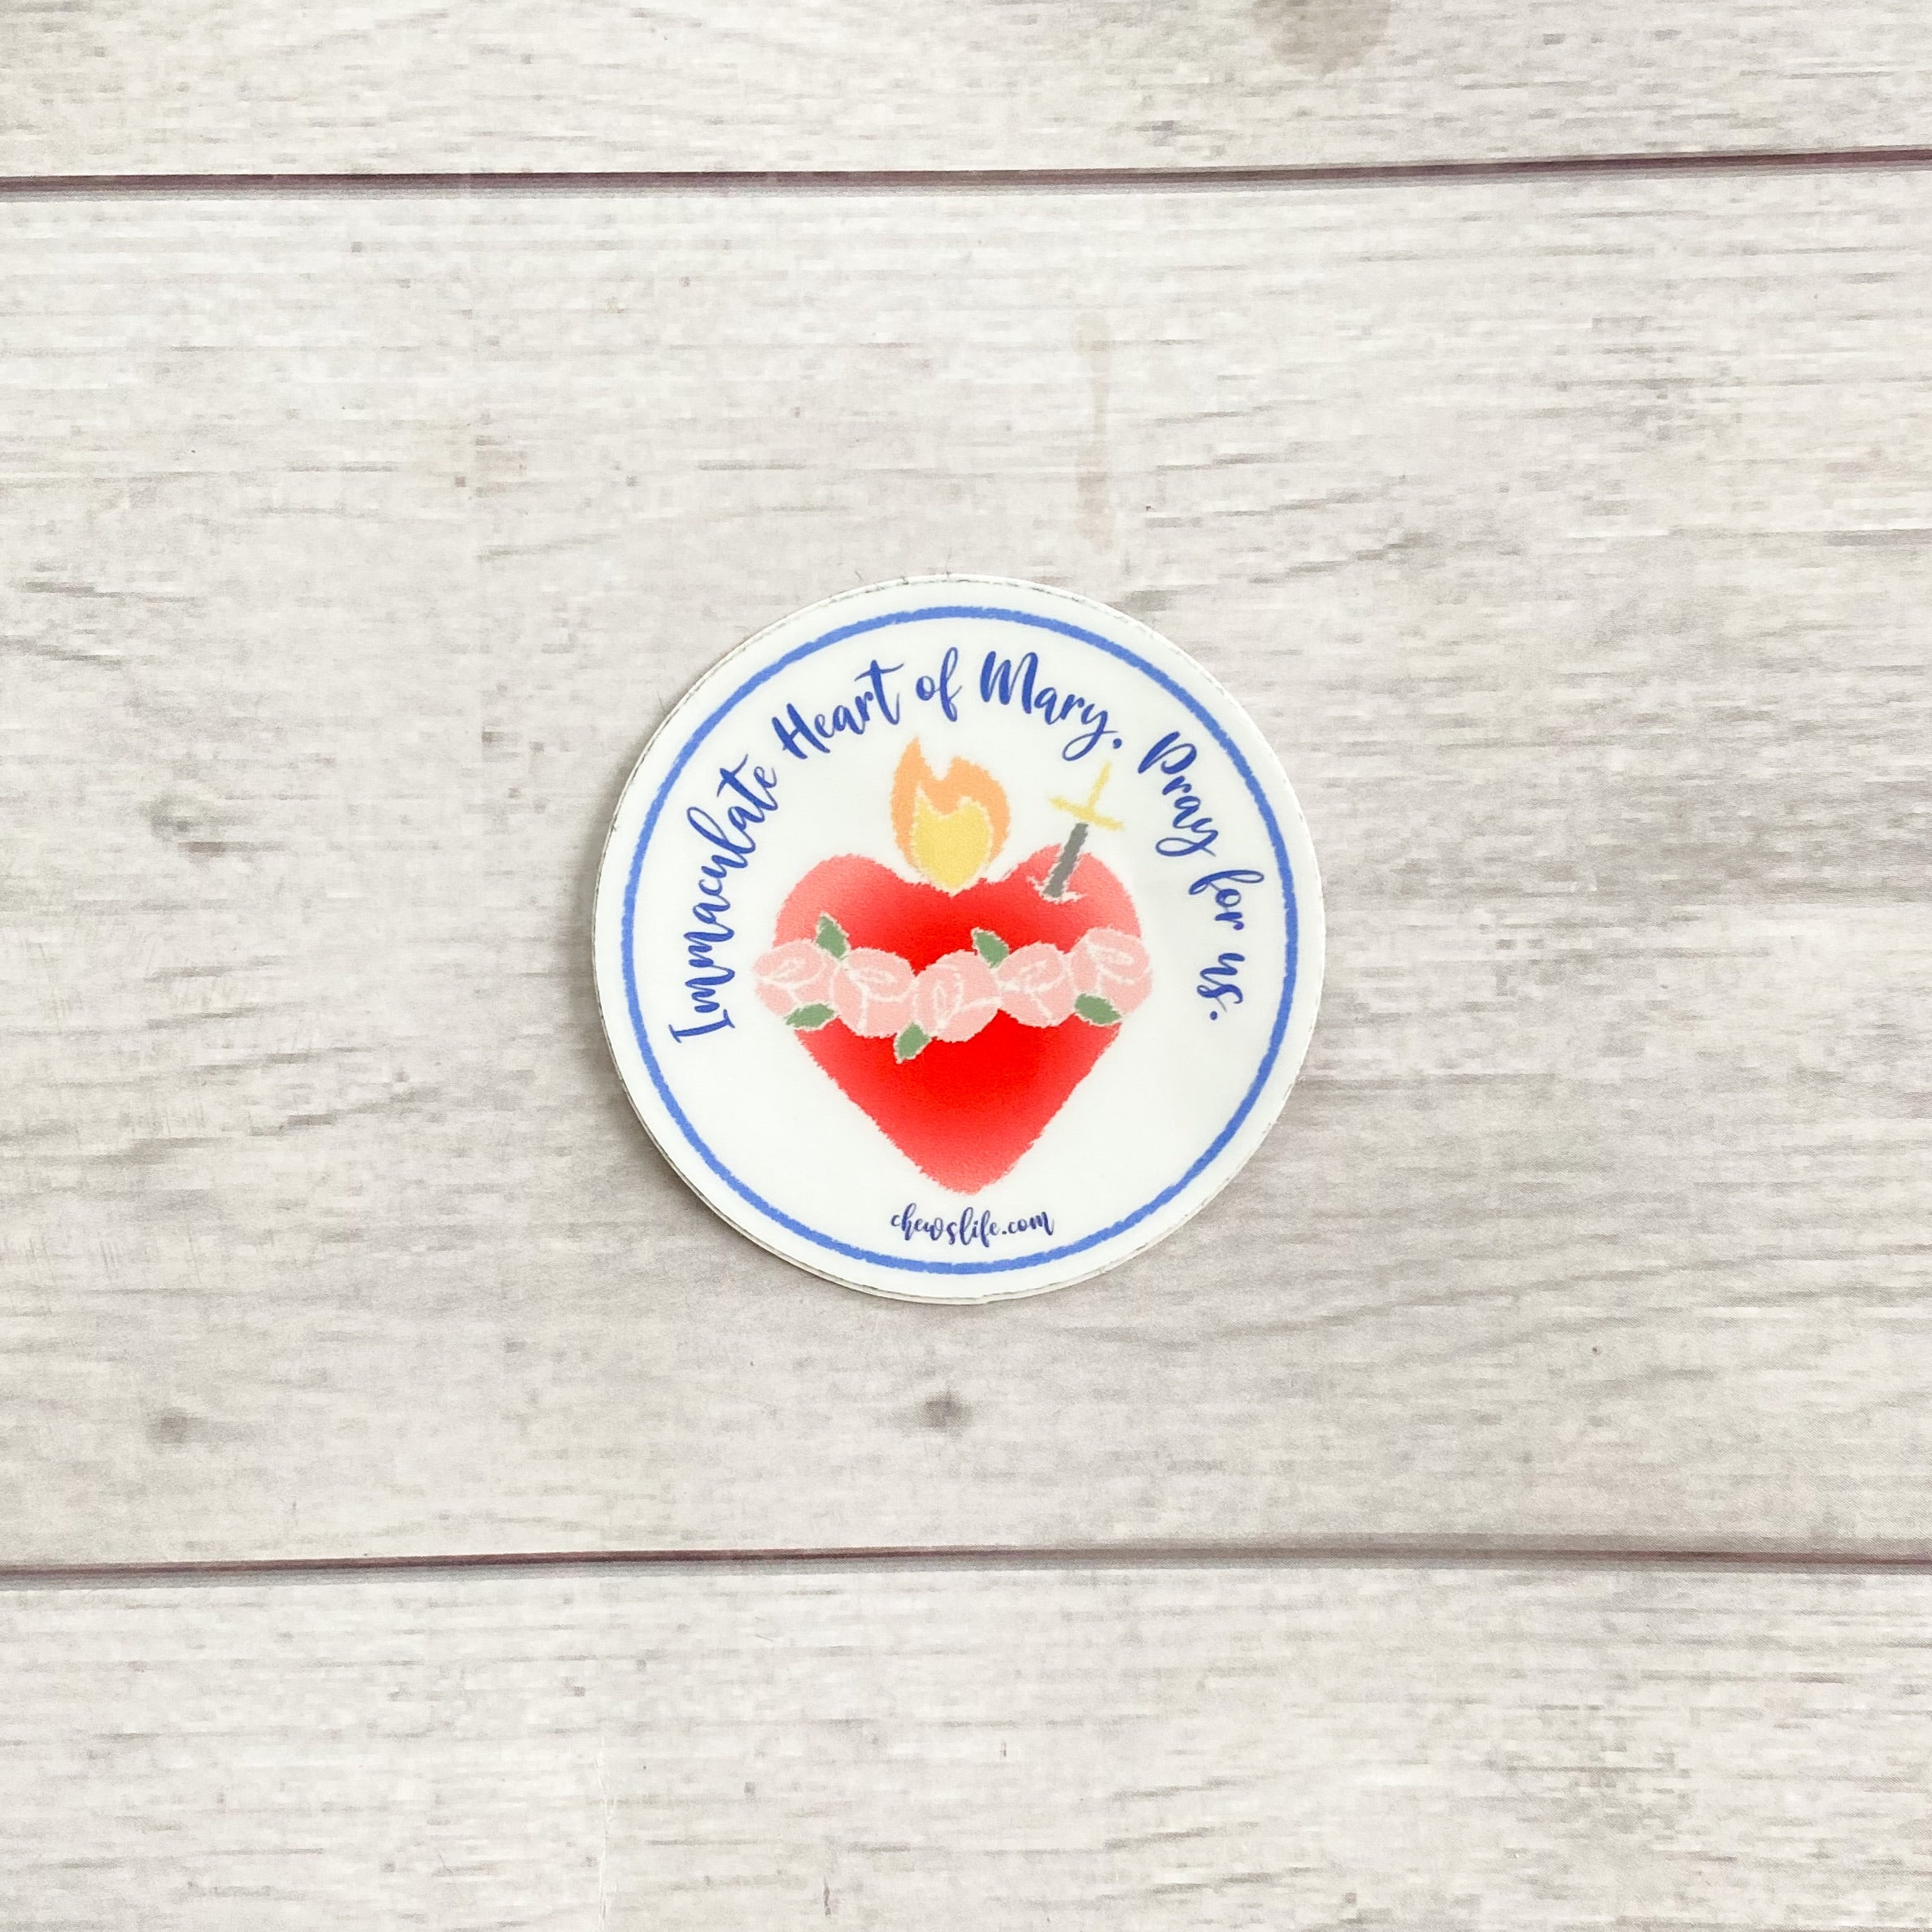 chews-life-immaculate-heart-of-mary-sticker-31349572665520.jpg